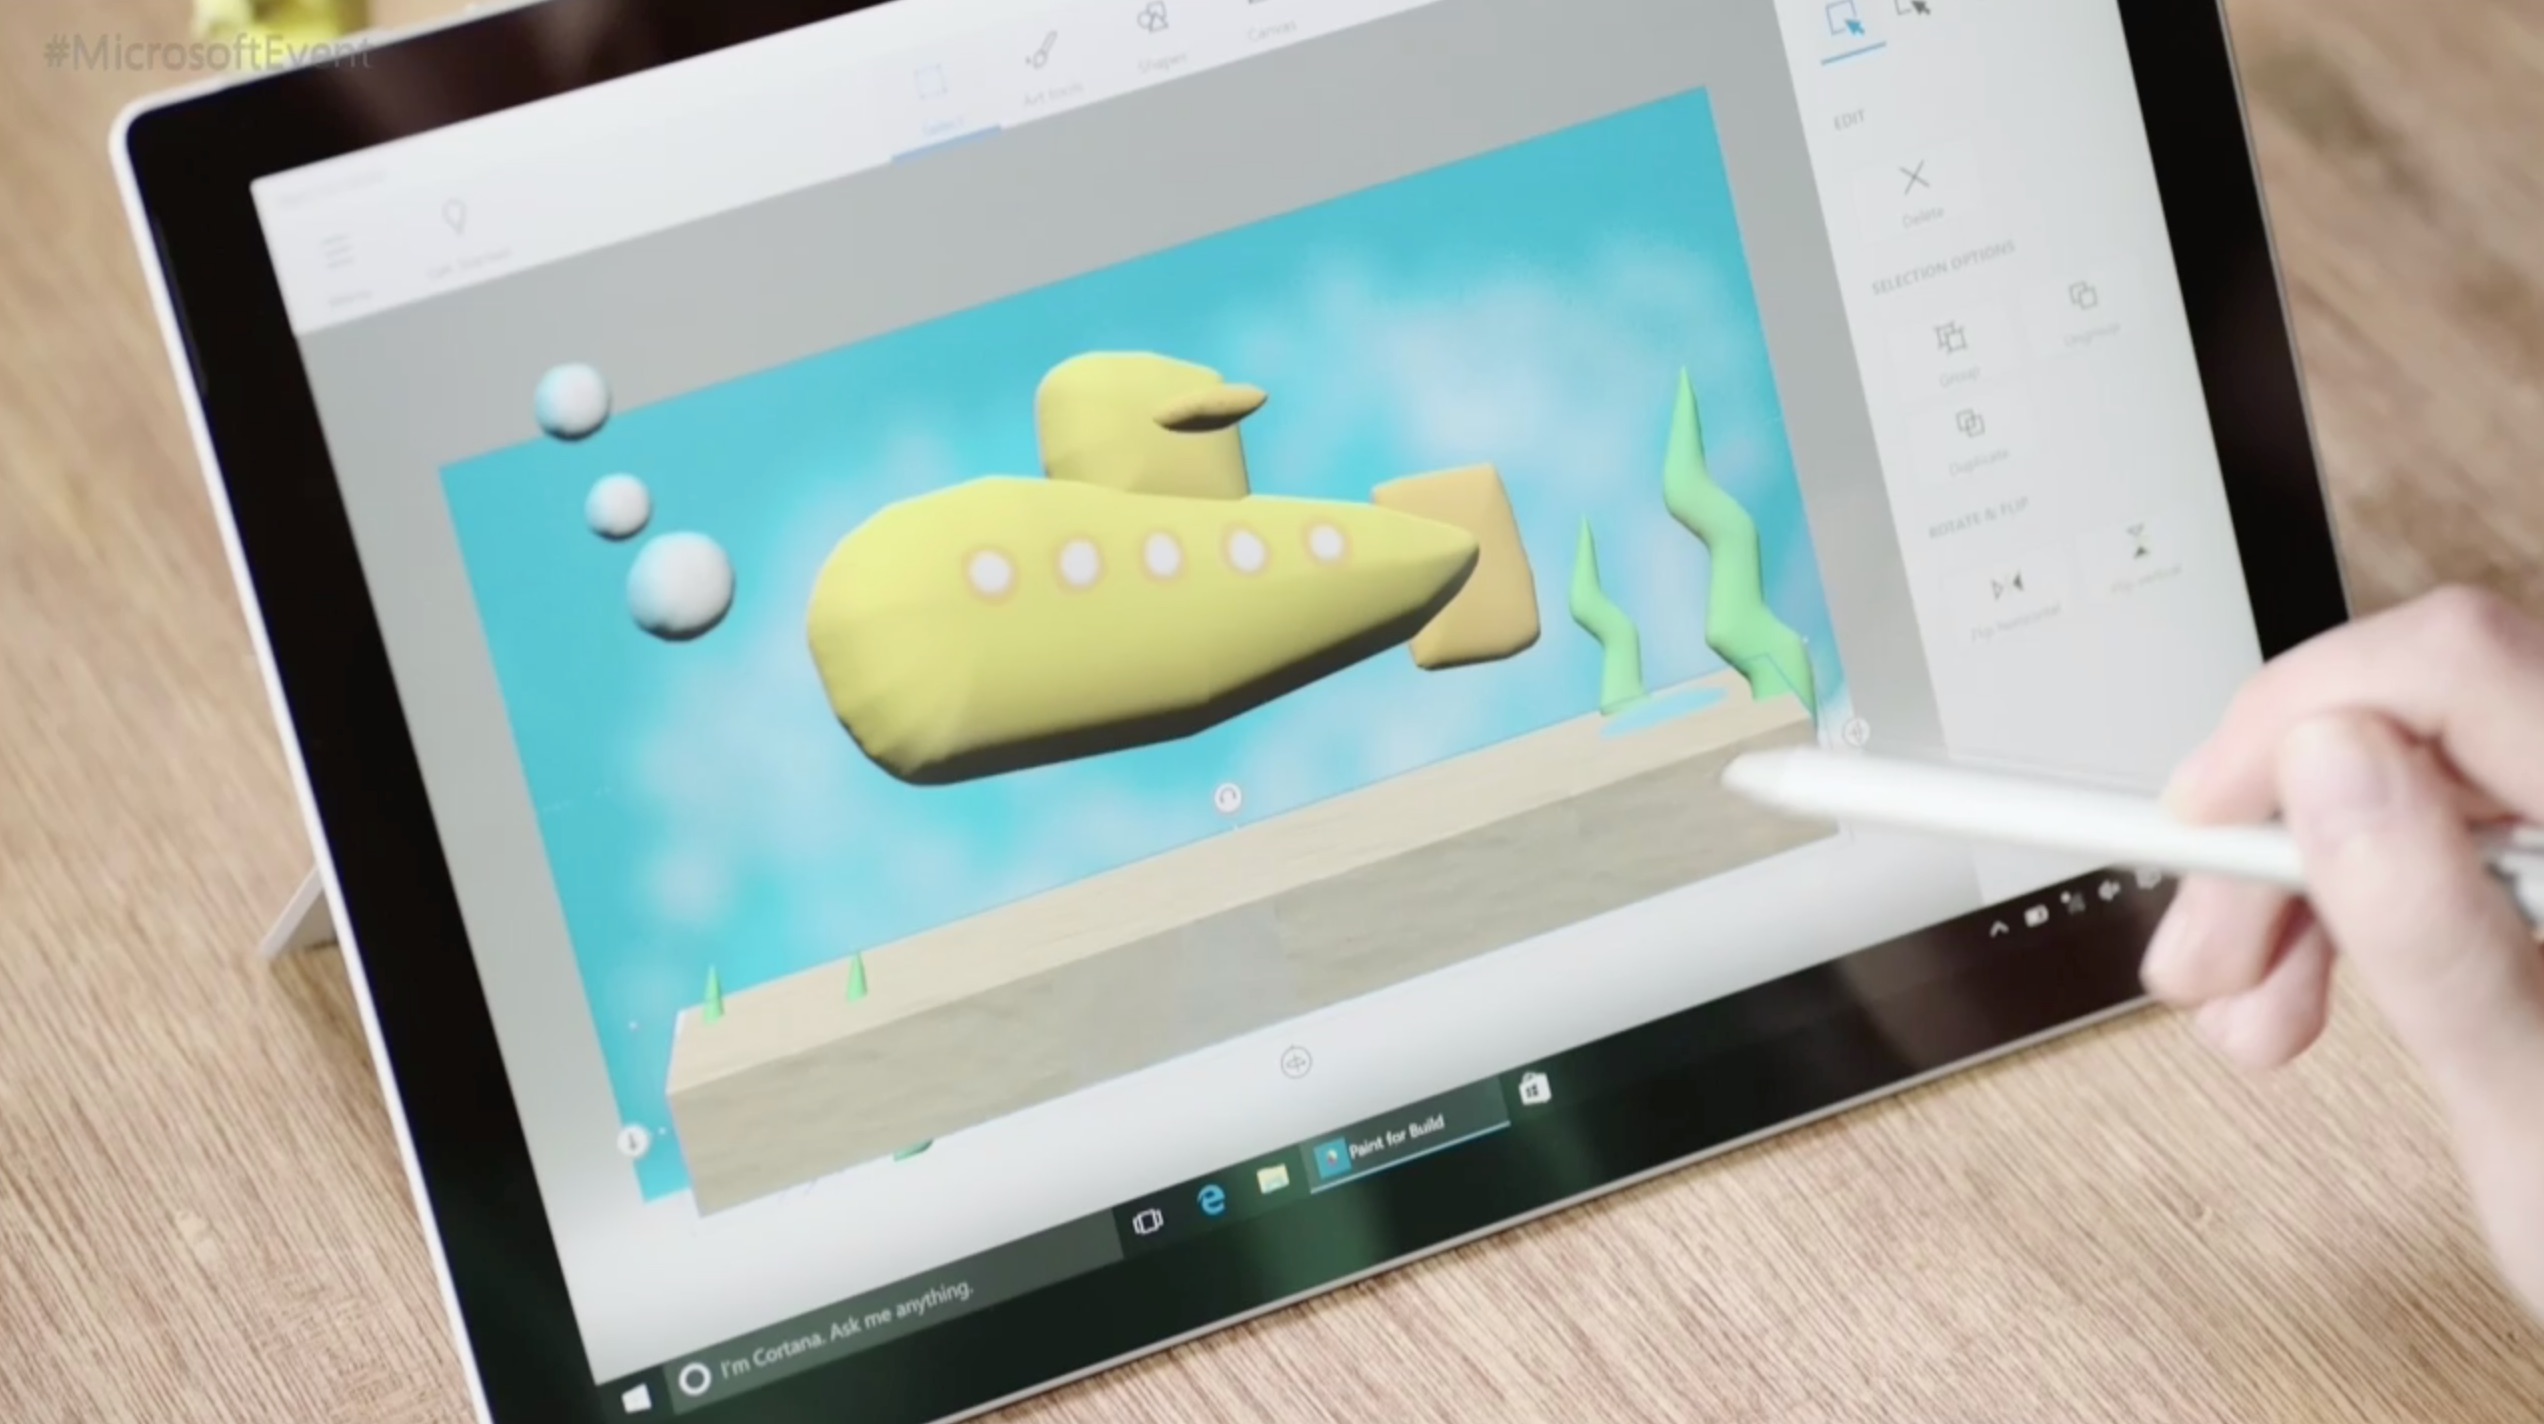 Microsoft’s Paint 3D is a simple entry into rudimentary 3D modeling ...